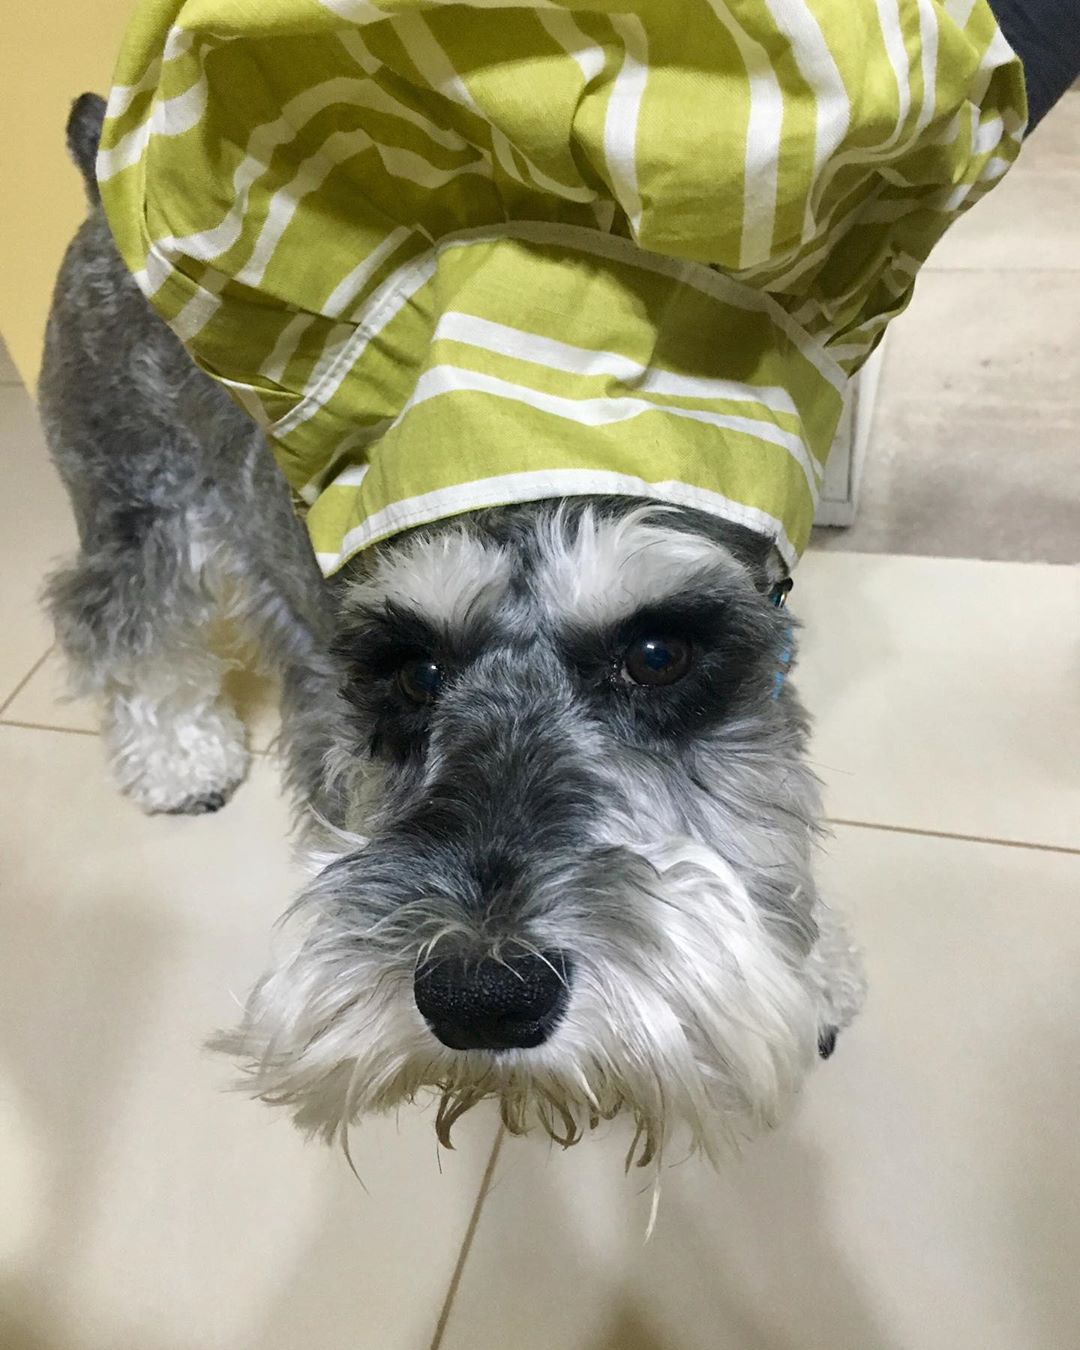 Schnauzer standing on the floor while wearing chef hat